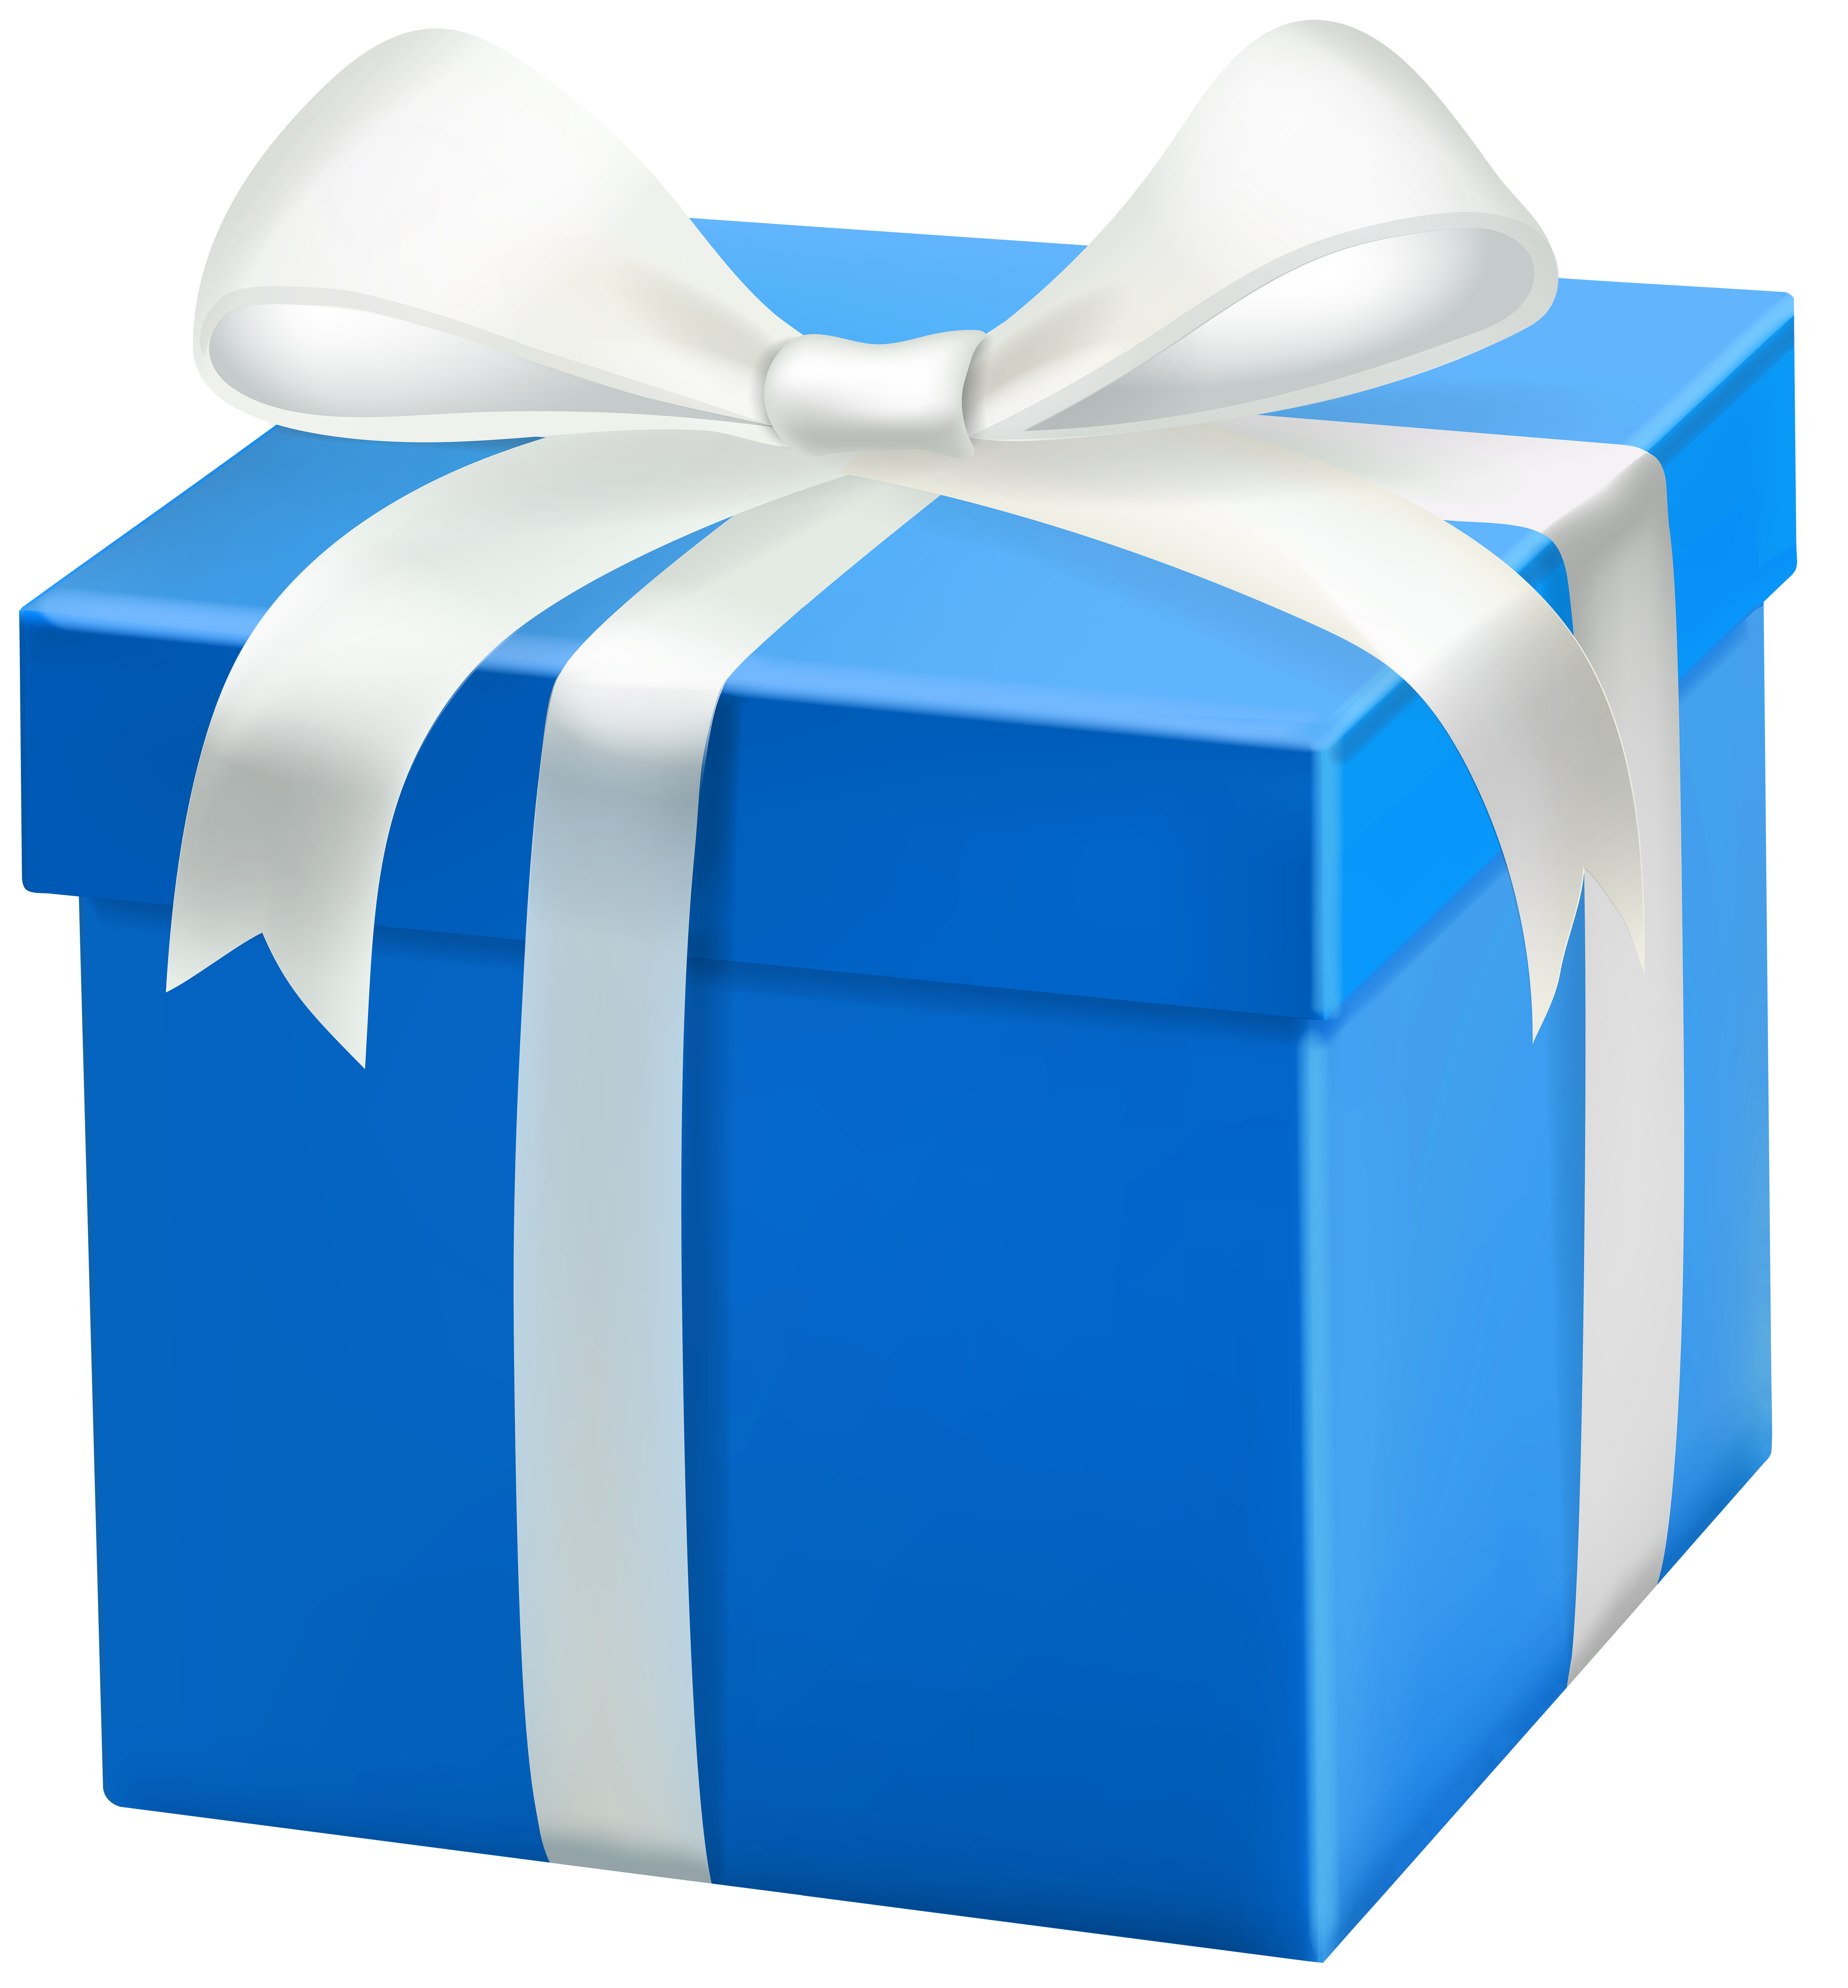 gifts clipart blue gift clipart, transparent - 4220.95Kb 6506x7000.